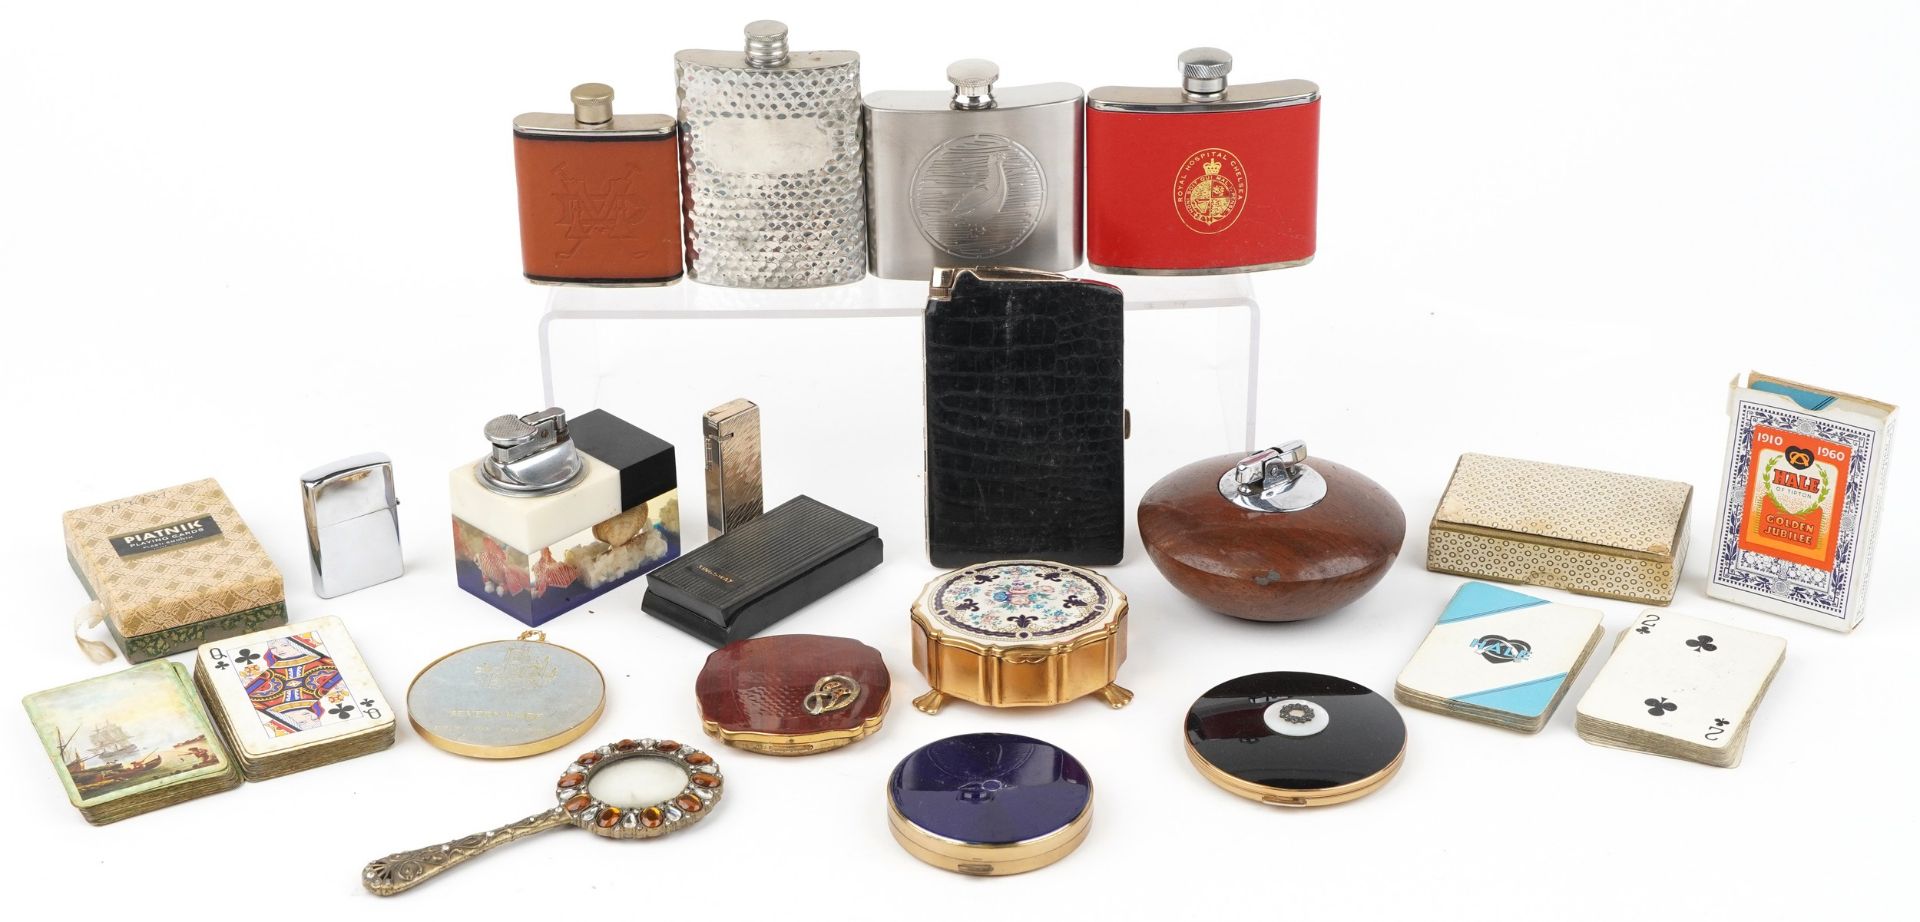 Sundry items including a marine table lighter, hip flasks, compact and vintage playing cards, the